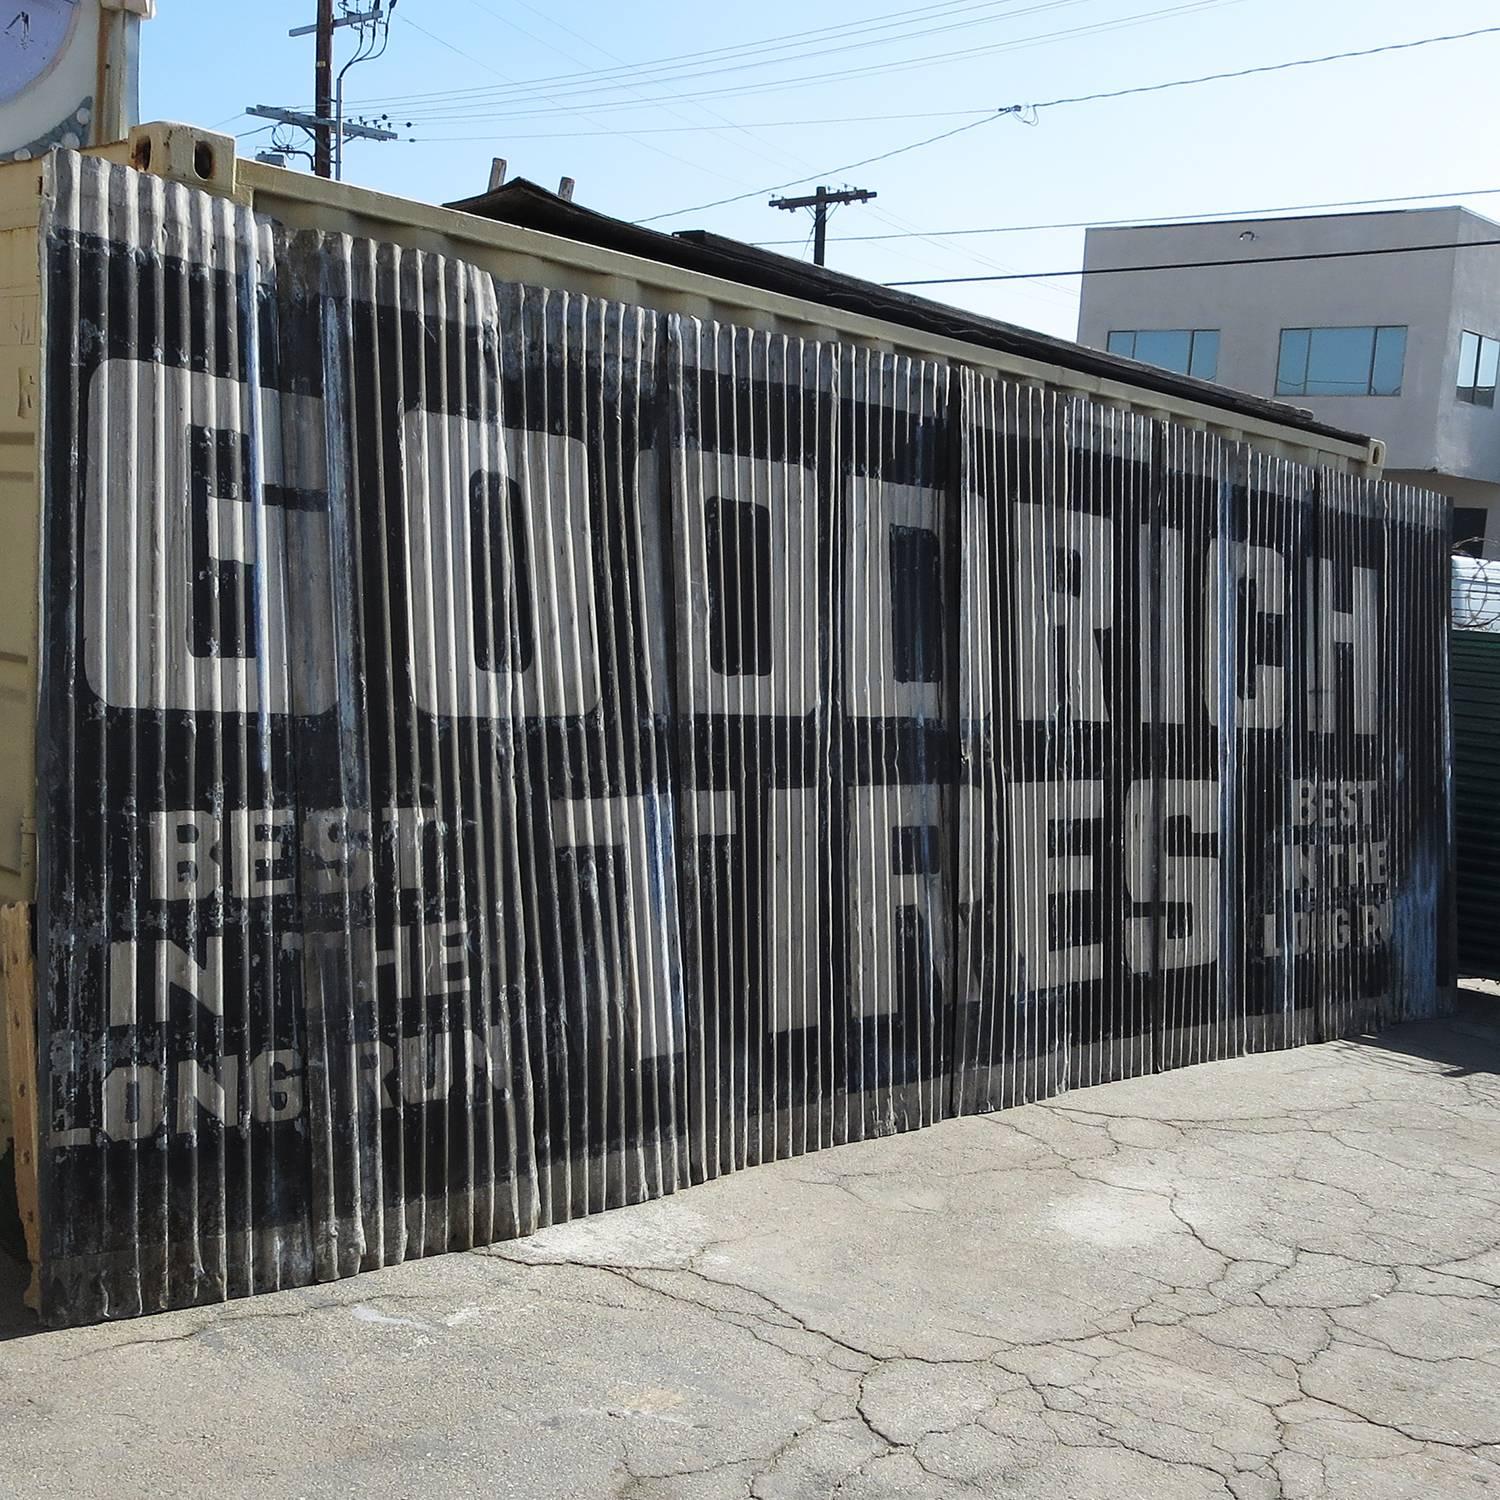 Looking to cover a large wall? This fantastic paneled sign came from an automotive establishment in the 1930s. Each panel overlaps to create the painted billboard, at 23 feet long, by 97 inches tall. The sign displays honest wear of years in the